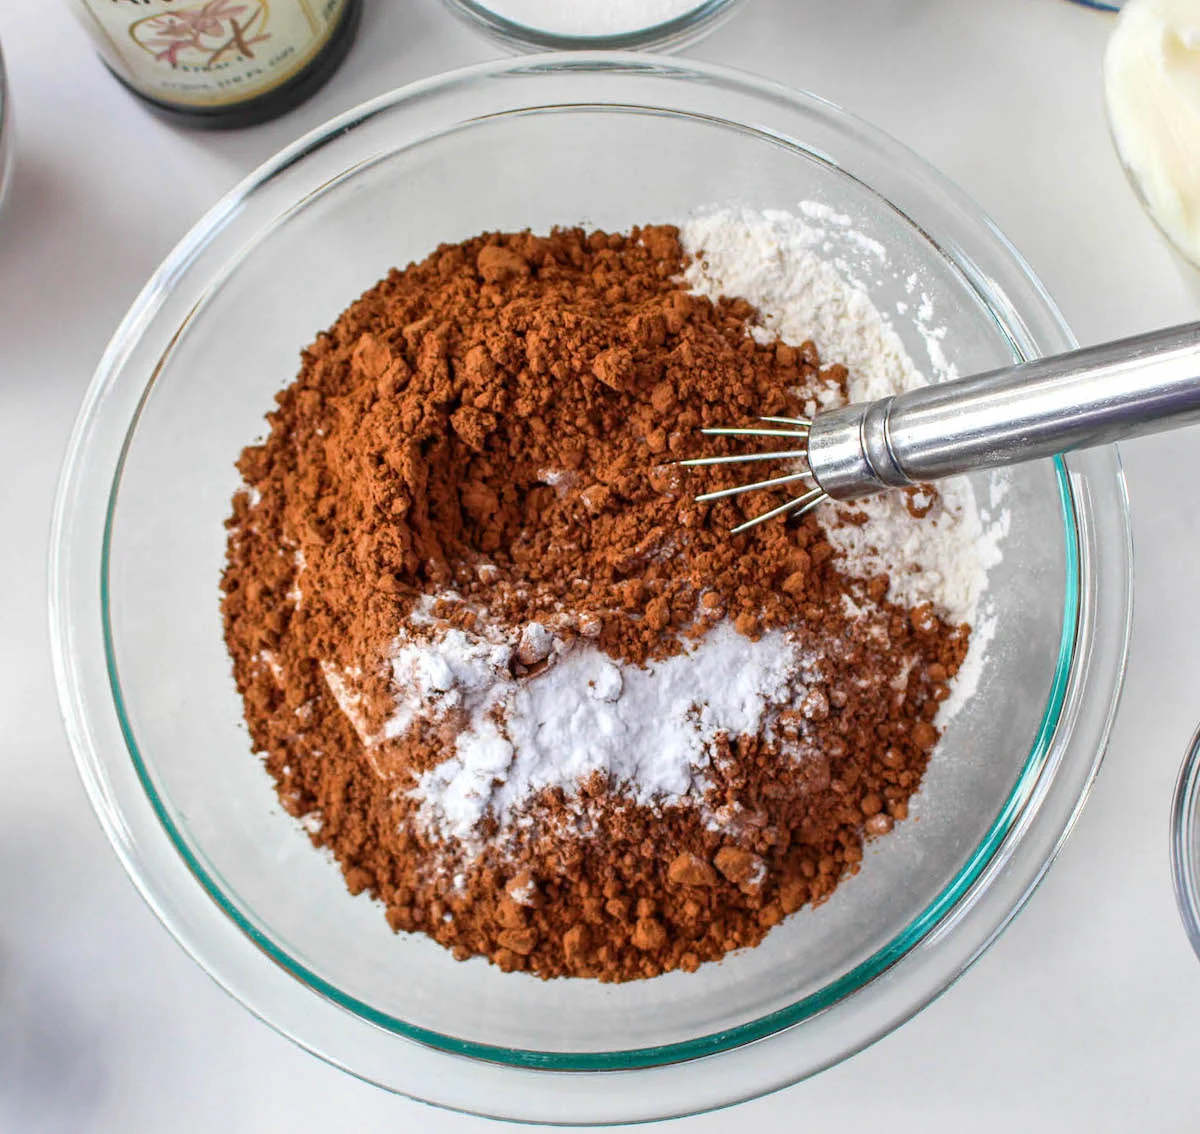 flour, cocoa powder, baking soda and salt whisked together in a bowl